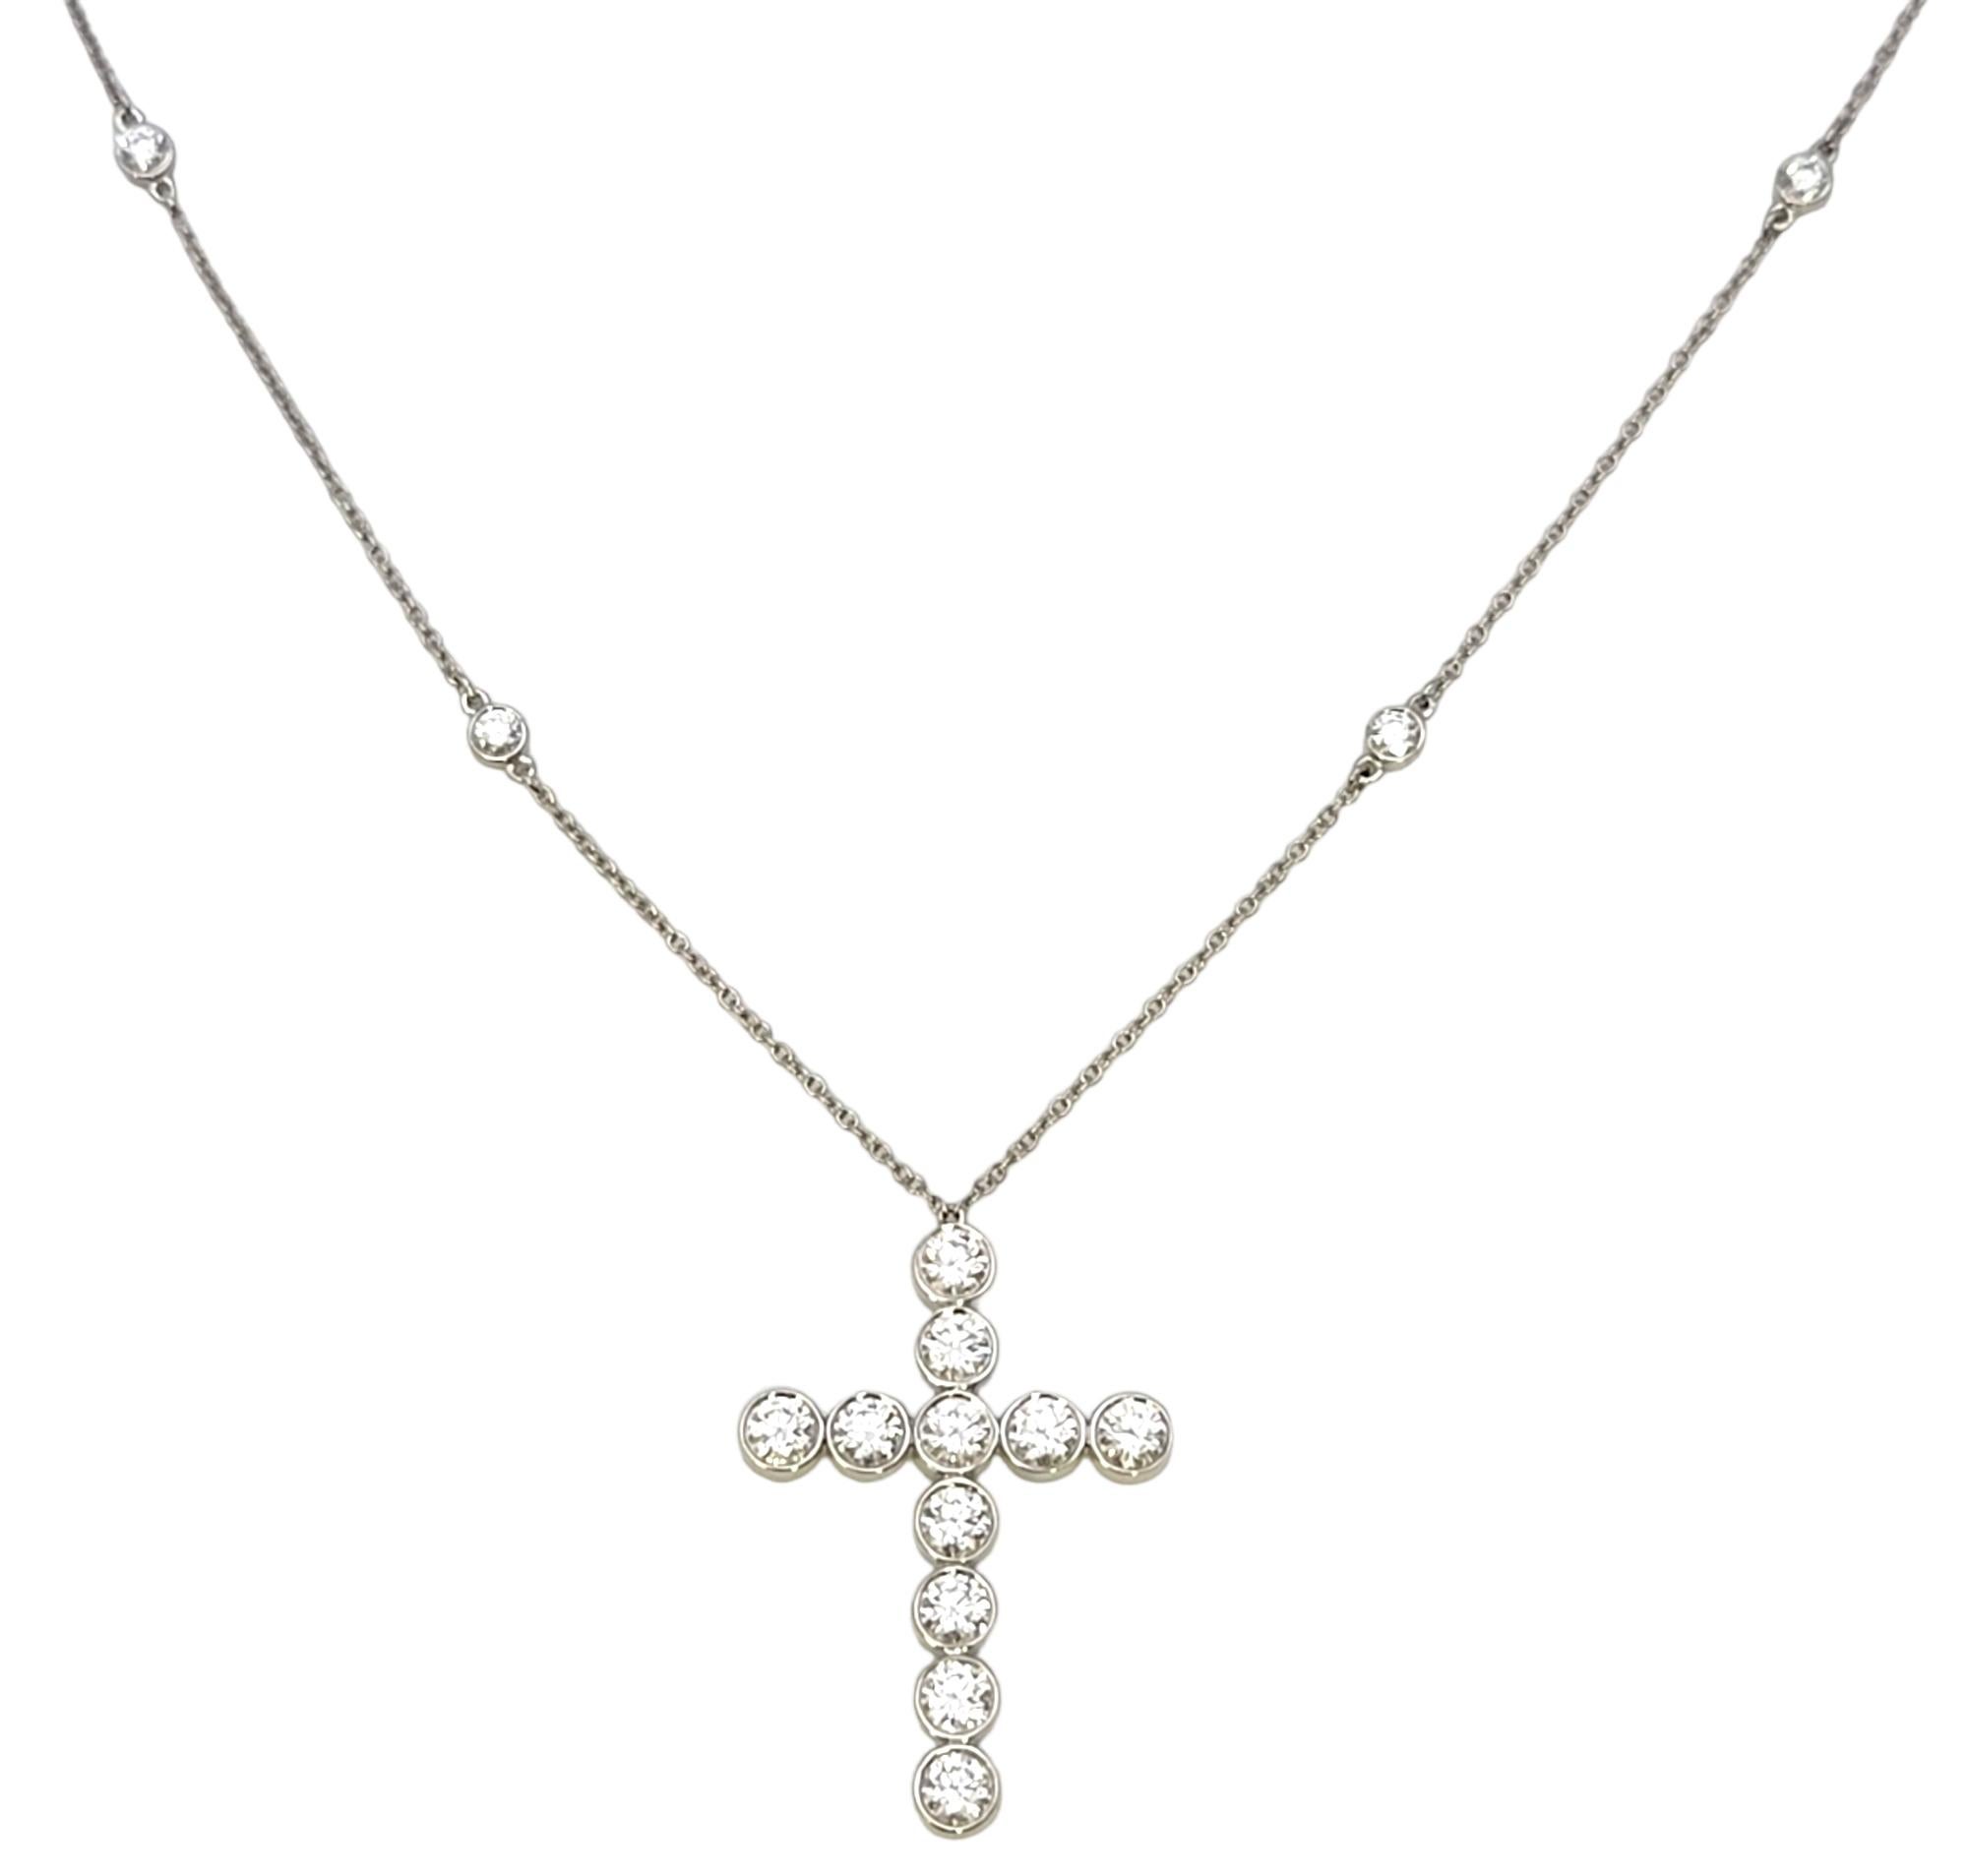 You will absolutely love the stunning design of this classic cross pendant necklace with a modern twist from renowned jeweler, Tiffany & Co. Founded in 1837 in New York City, Tiffany & Co. is one of the world's most storied luxury design houses